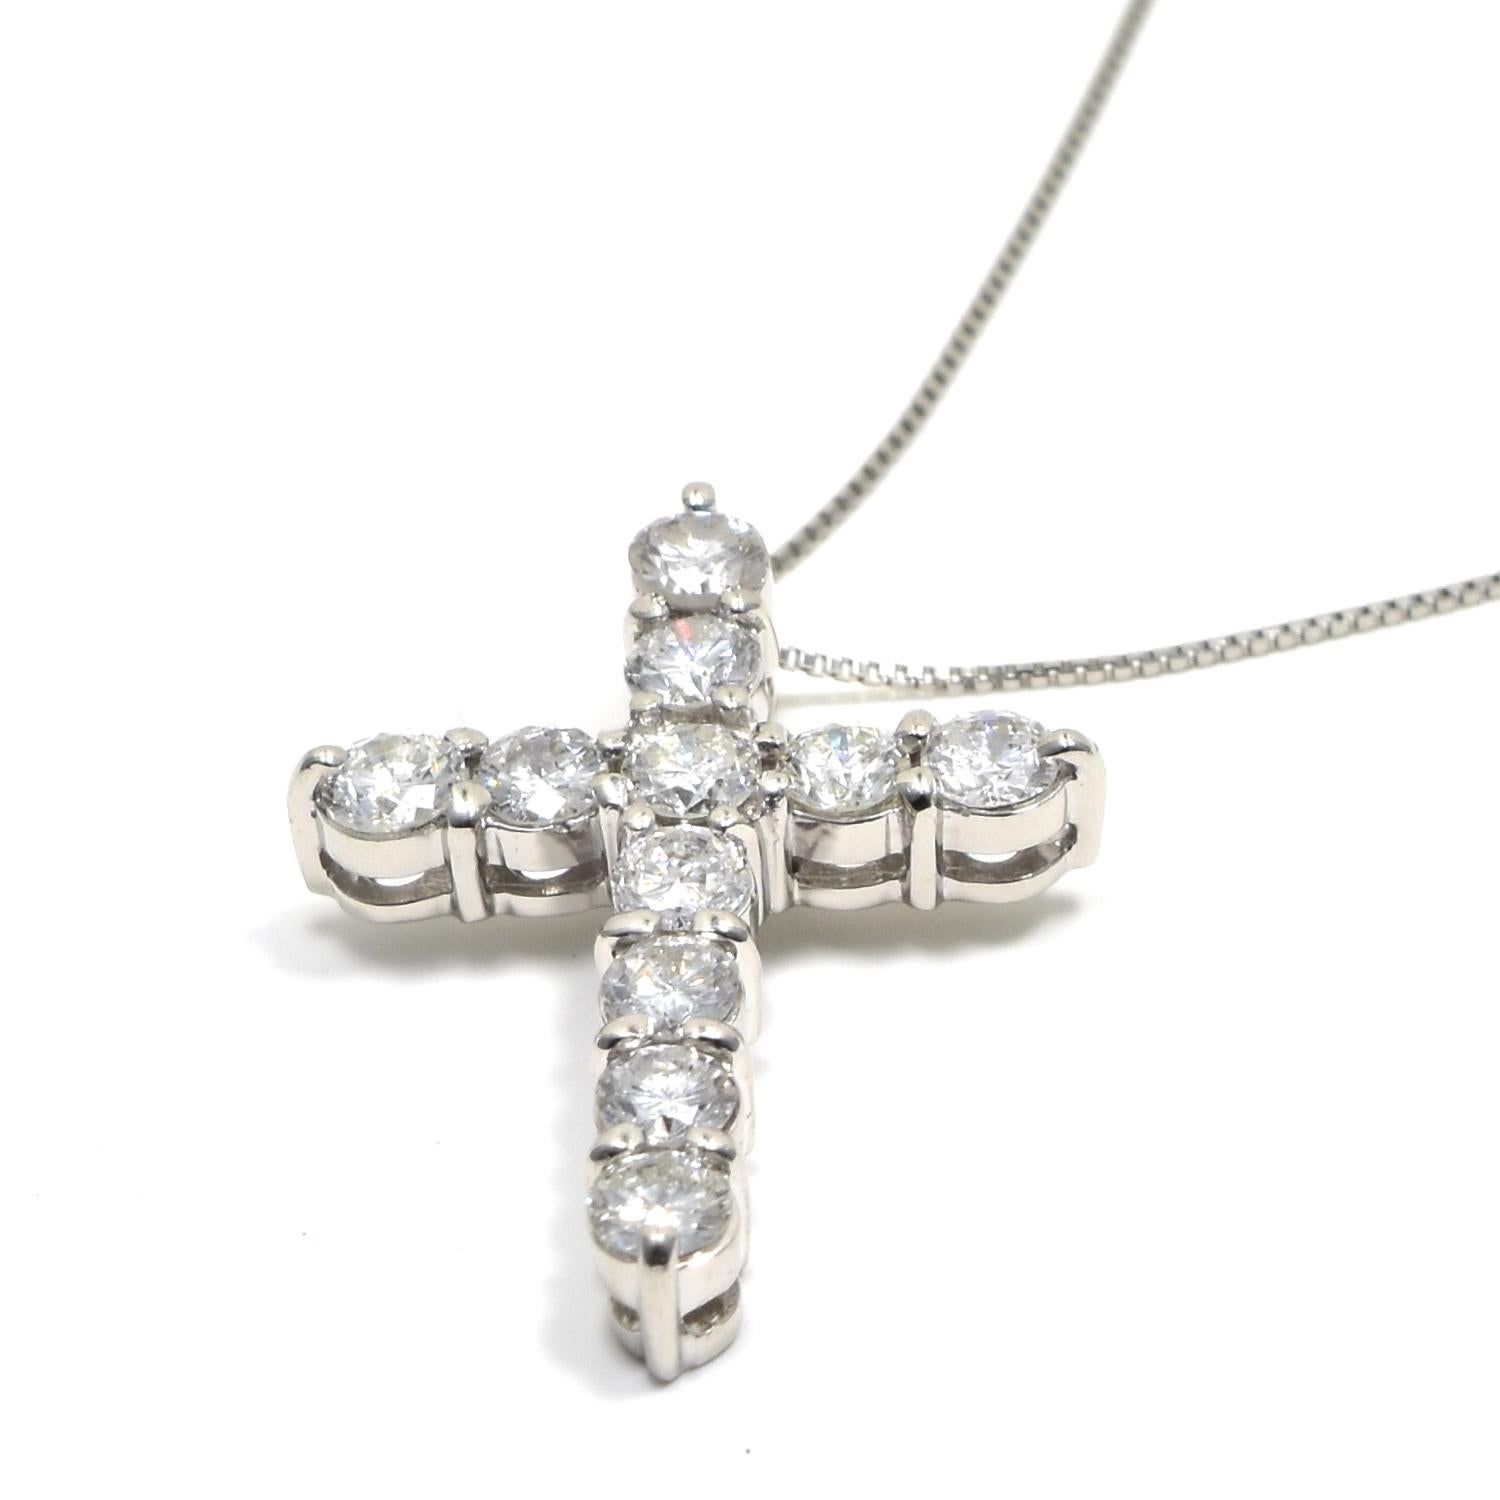 Style: Pendant

Theme: Cross & Religion

Metal: Platinum

Stone:  Round Diamond

Total Carat Weight: 1.5 ctw

Total Item Weight (grams): 6.3 g

Cross Width: 2 cm

Chain Length: 16 inches

Includes: Brilliance Jewels Pouch